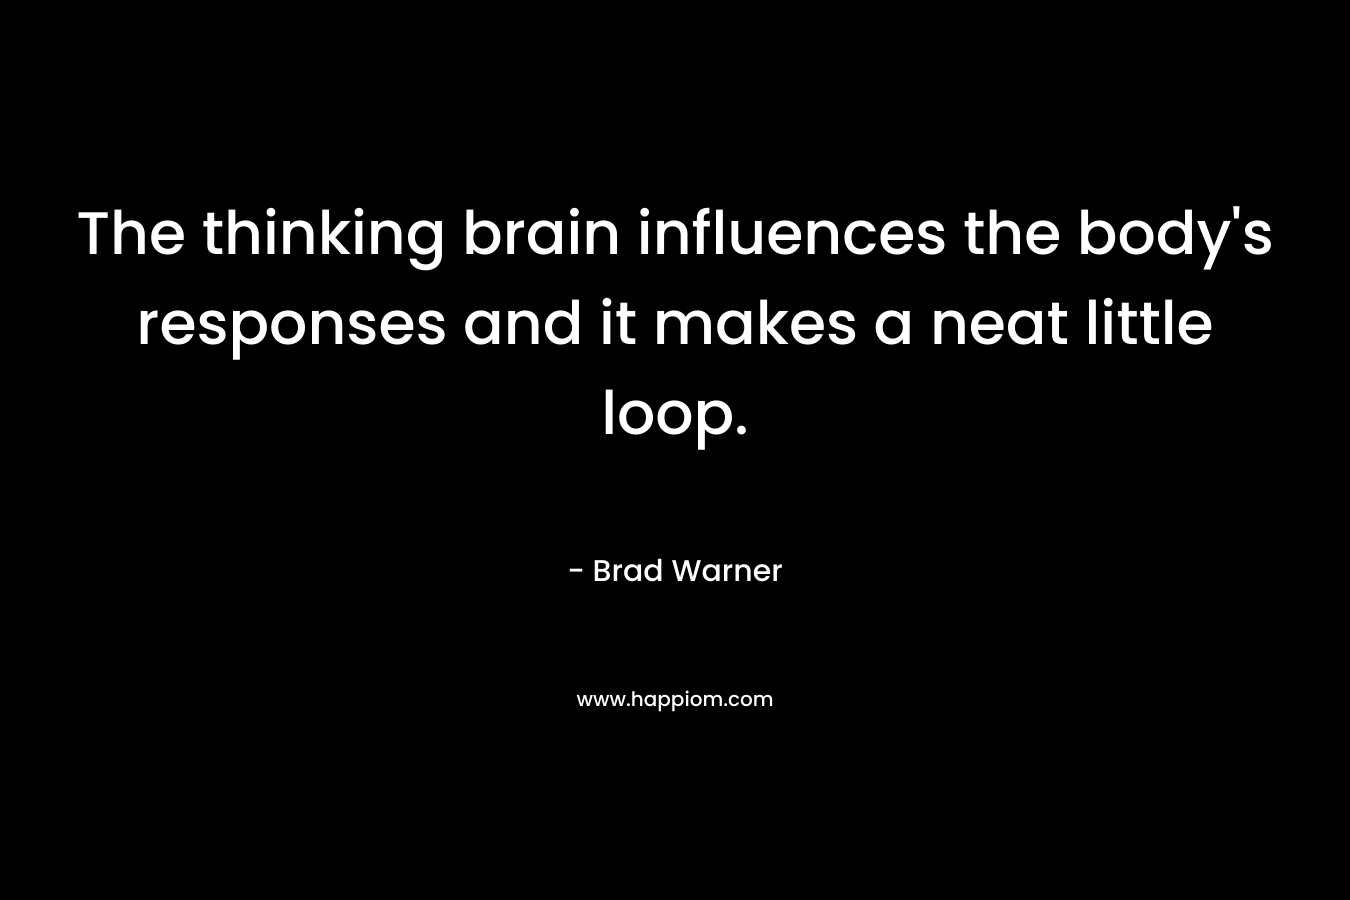 The thinking brain influences the body's responses and it makes a neat little loop.